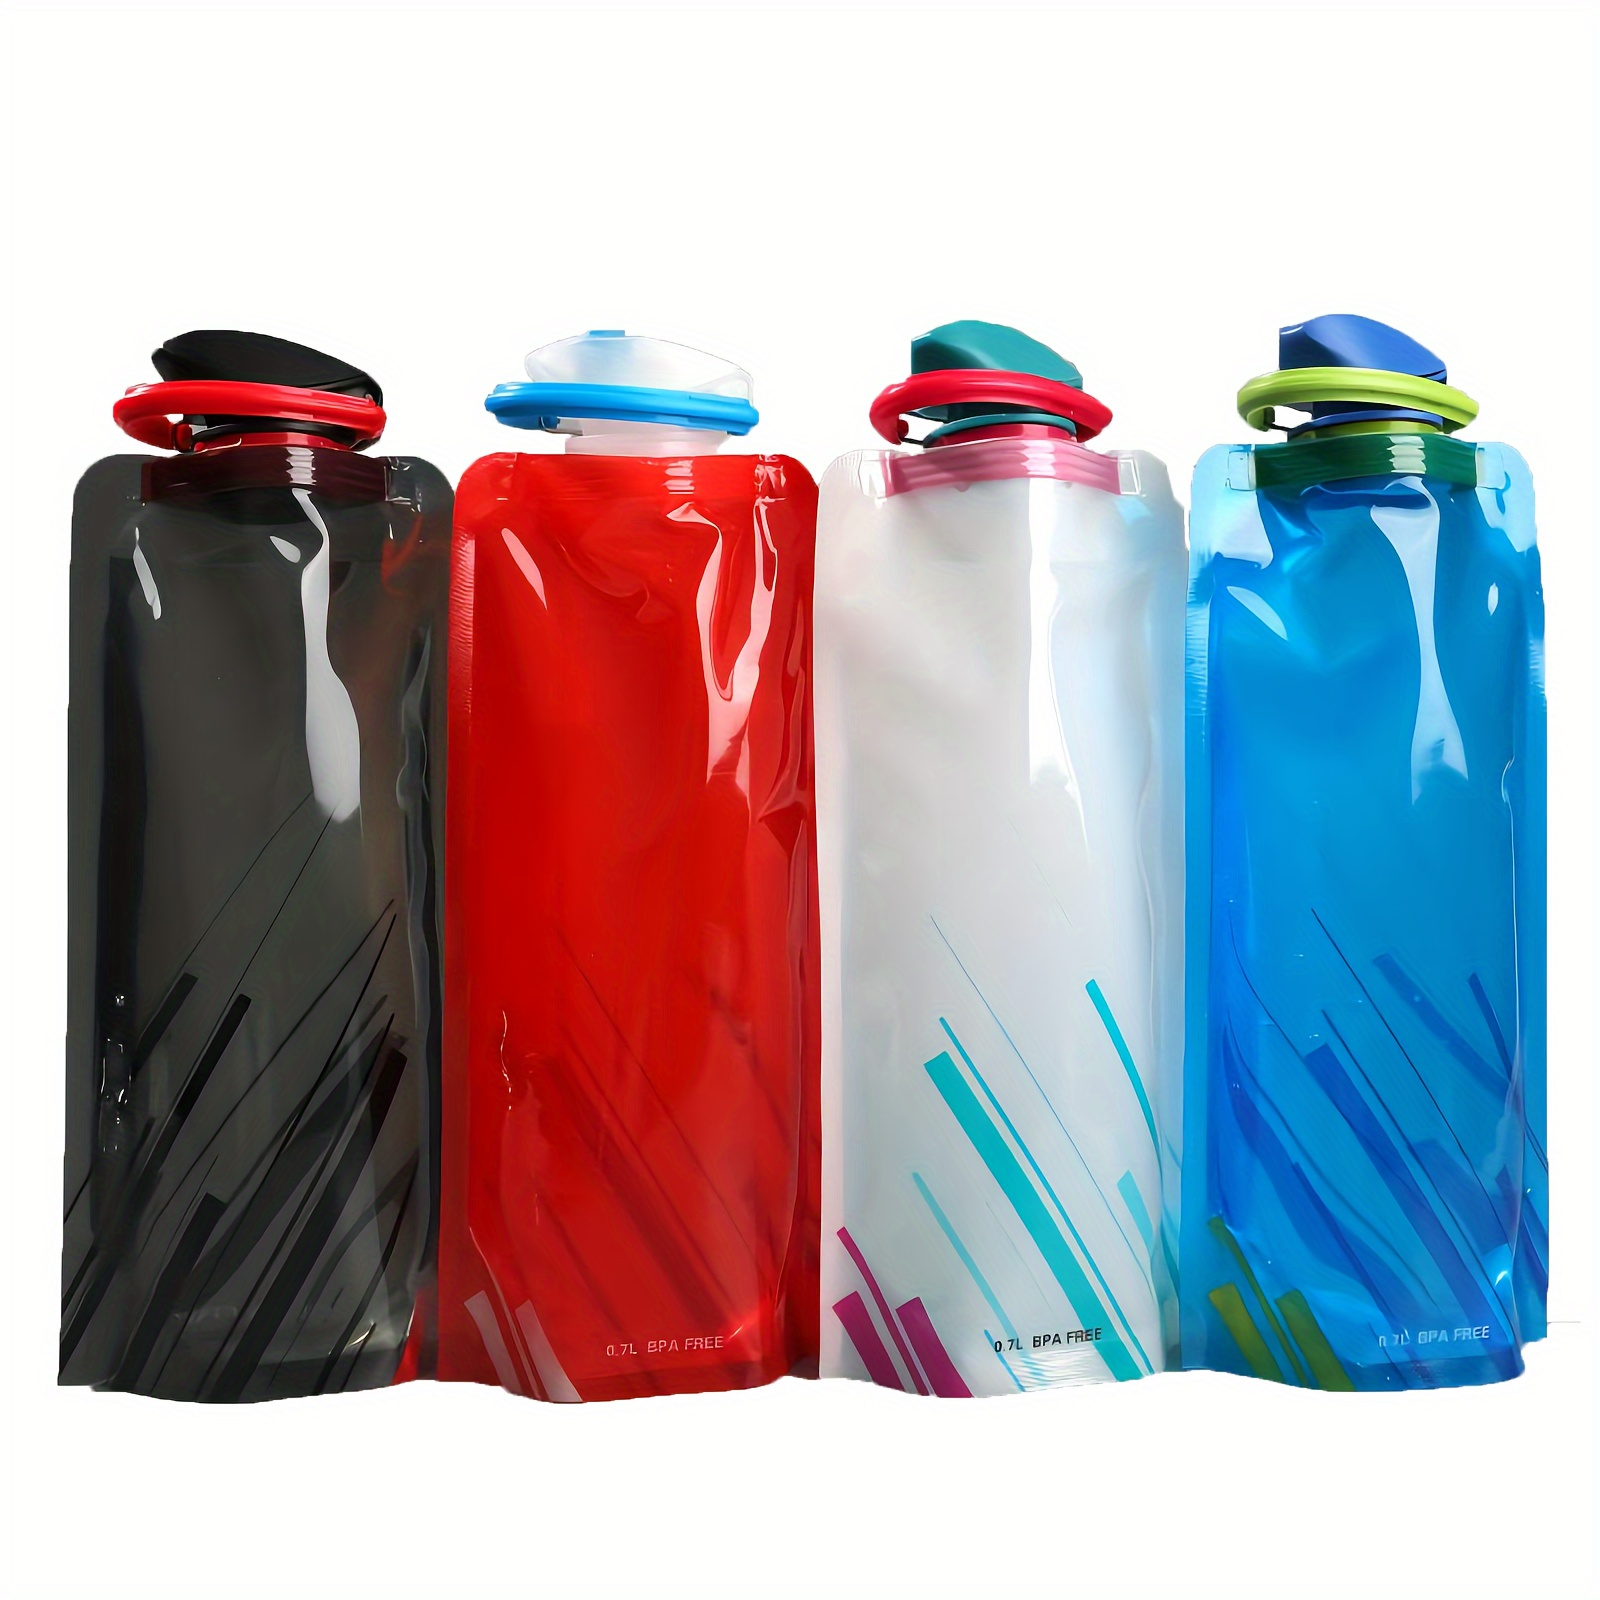 

4pcs 700ml/23.67oz Portable Foldable Water Bottle, Collapsible Water Cup With Carabiner Clip, Suitable For Running, Cycling, Outdoor Hiking, Camping, Adventure